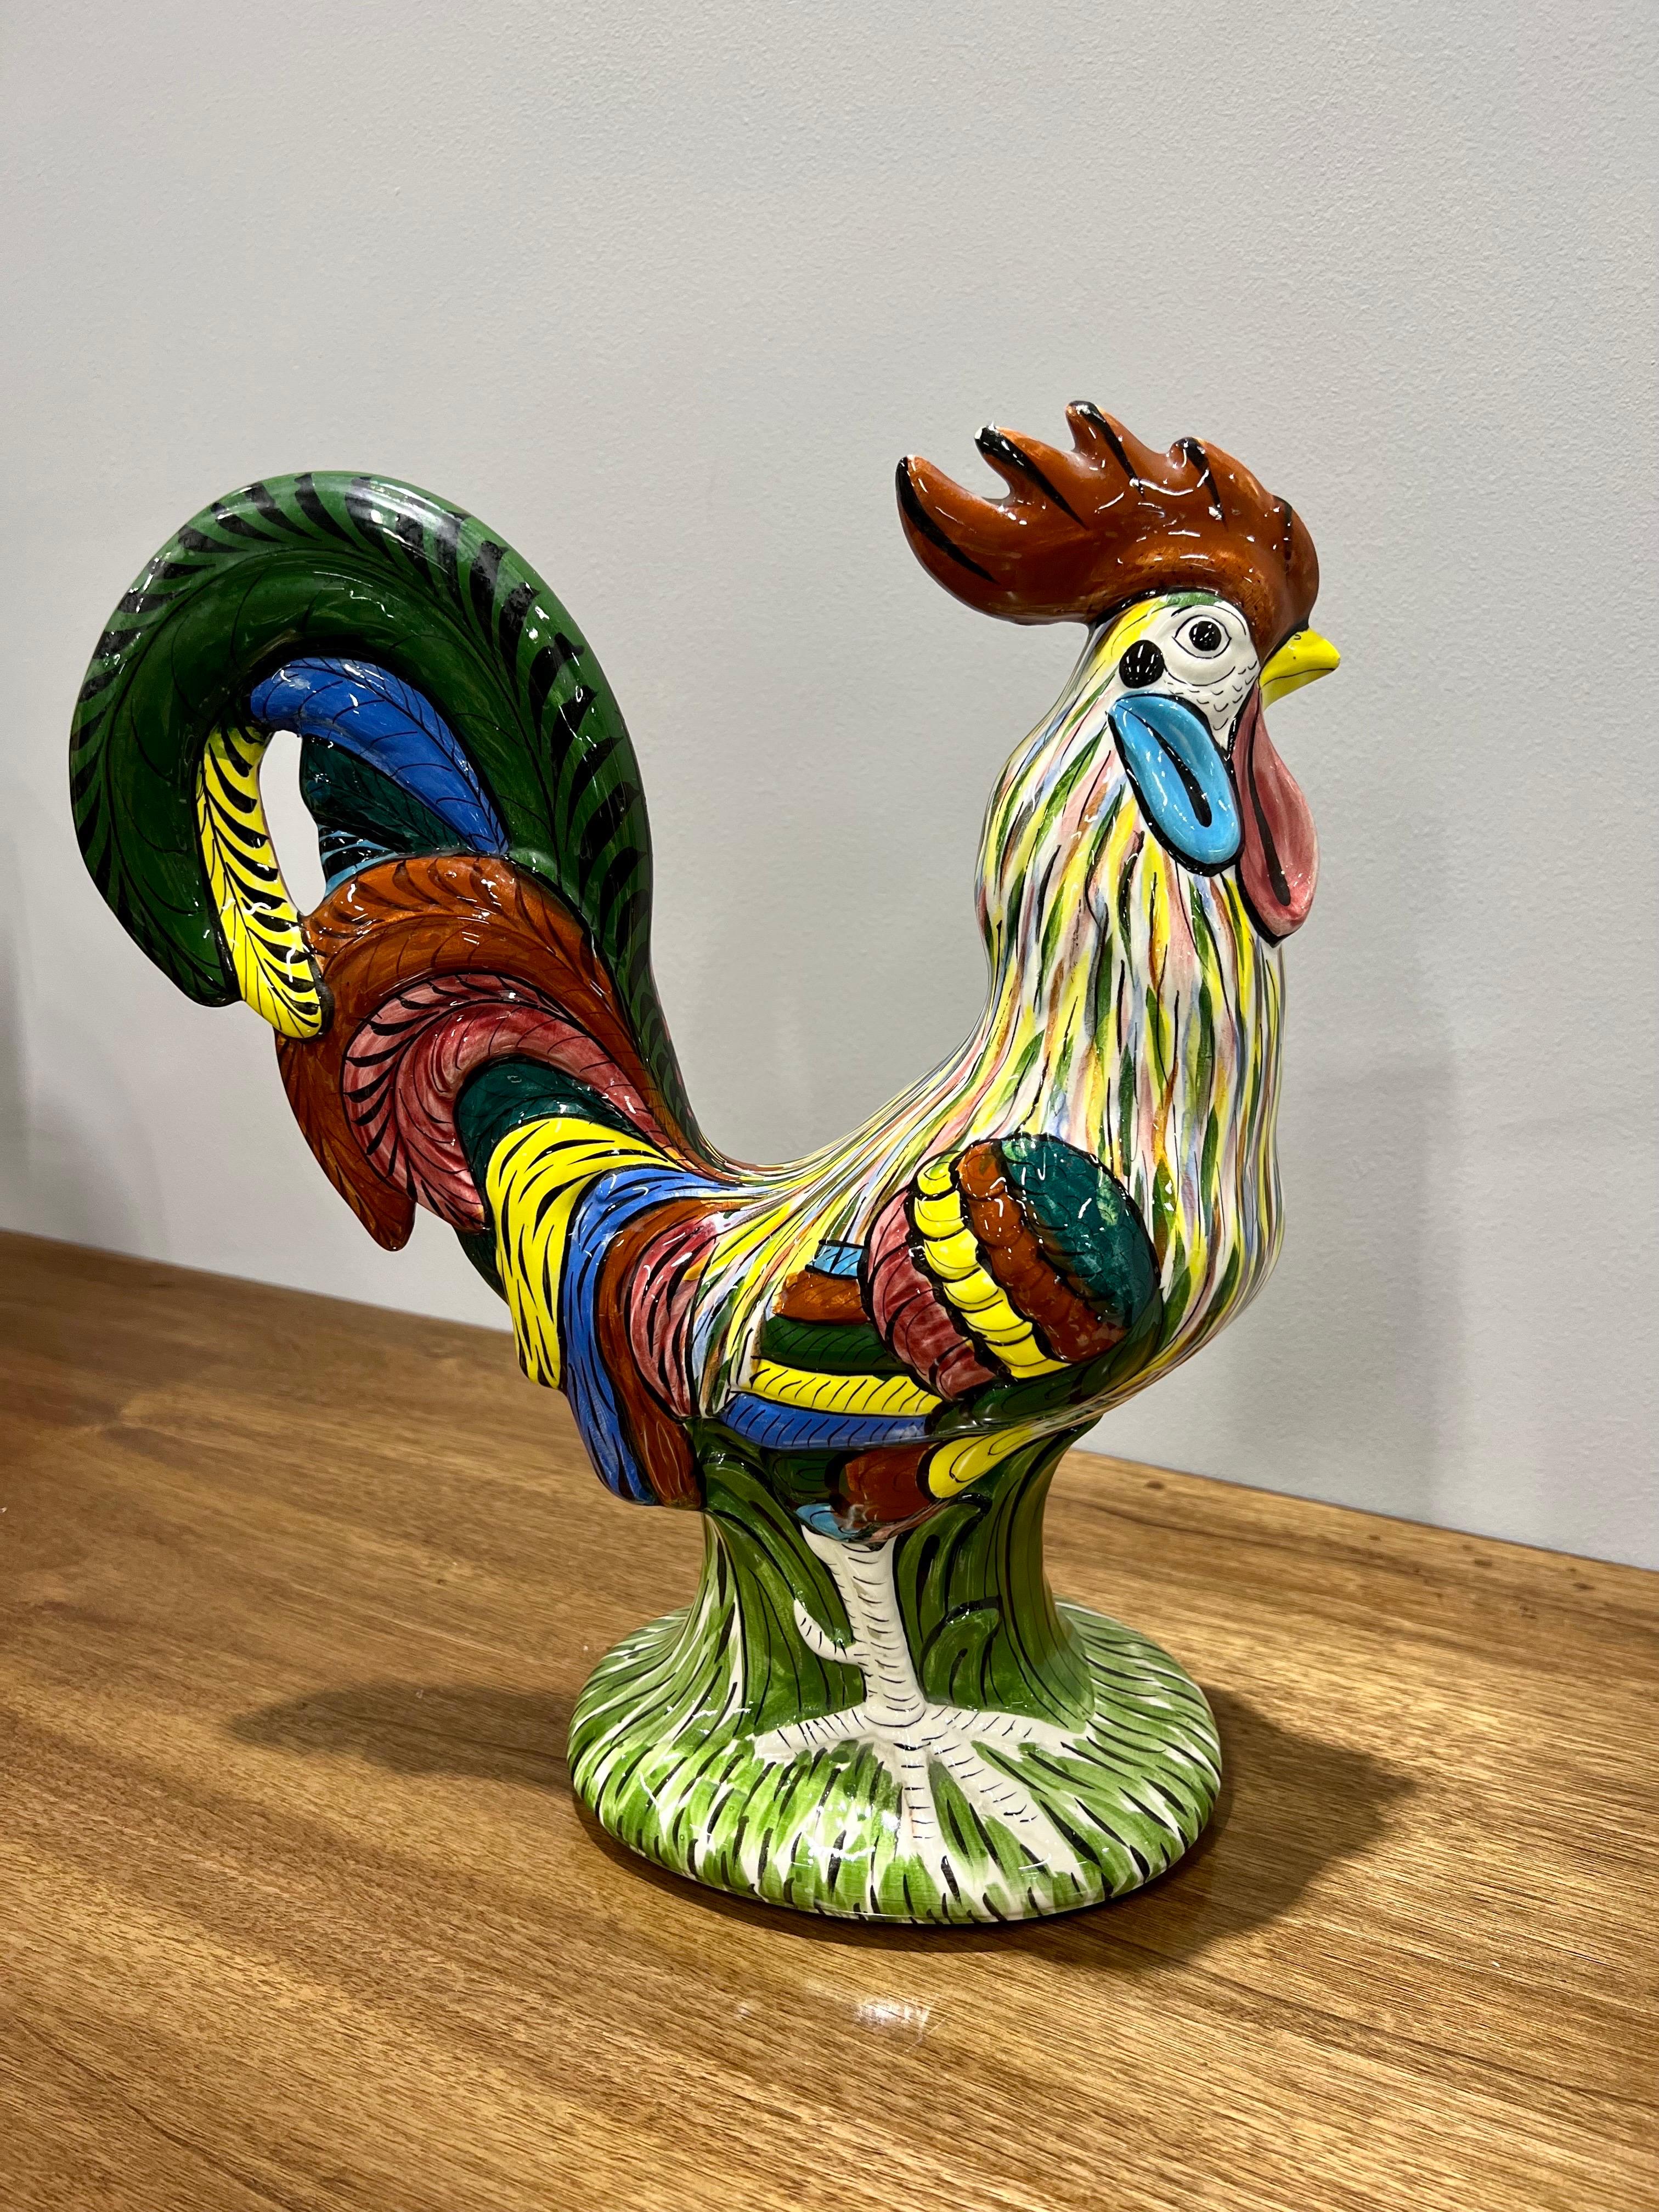 Exquisite glazed ceramic roosterd. Designed and hand painted by Mexican ceramist and artist Noe Suro at his Workshop in Tlaquepaque, Jalisco, in the early seventies.